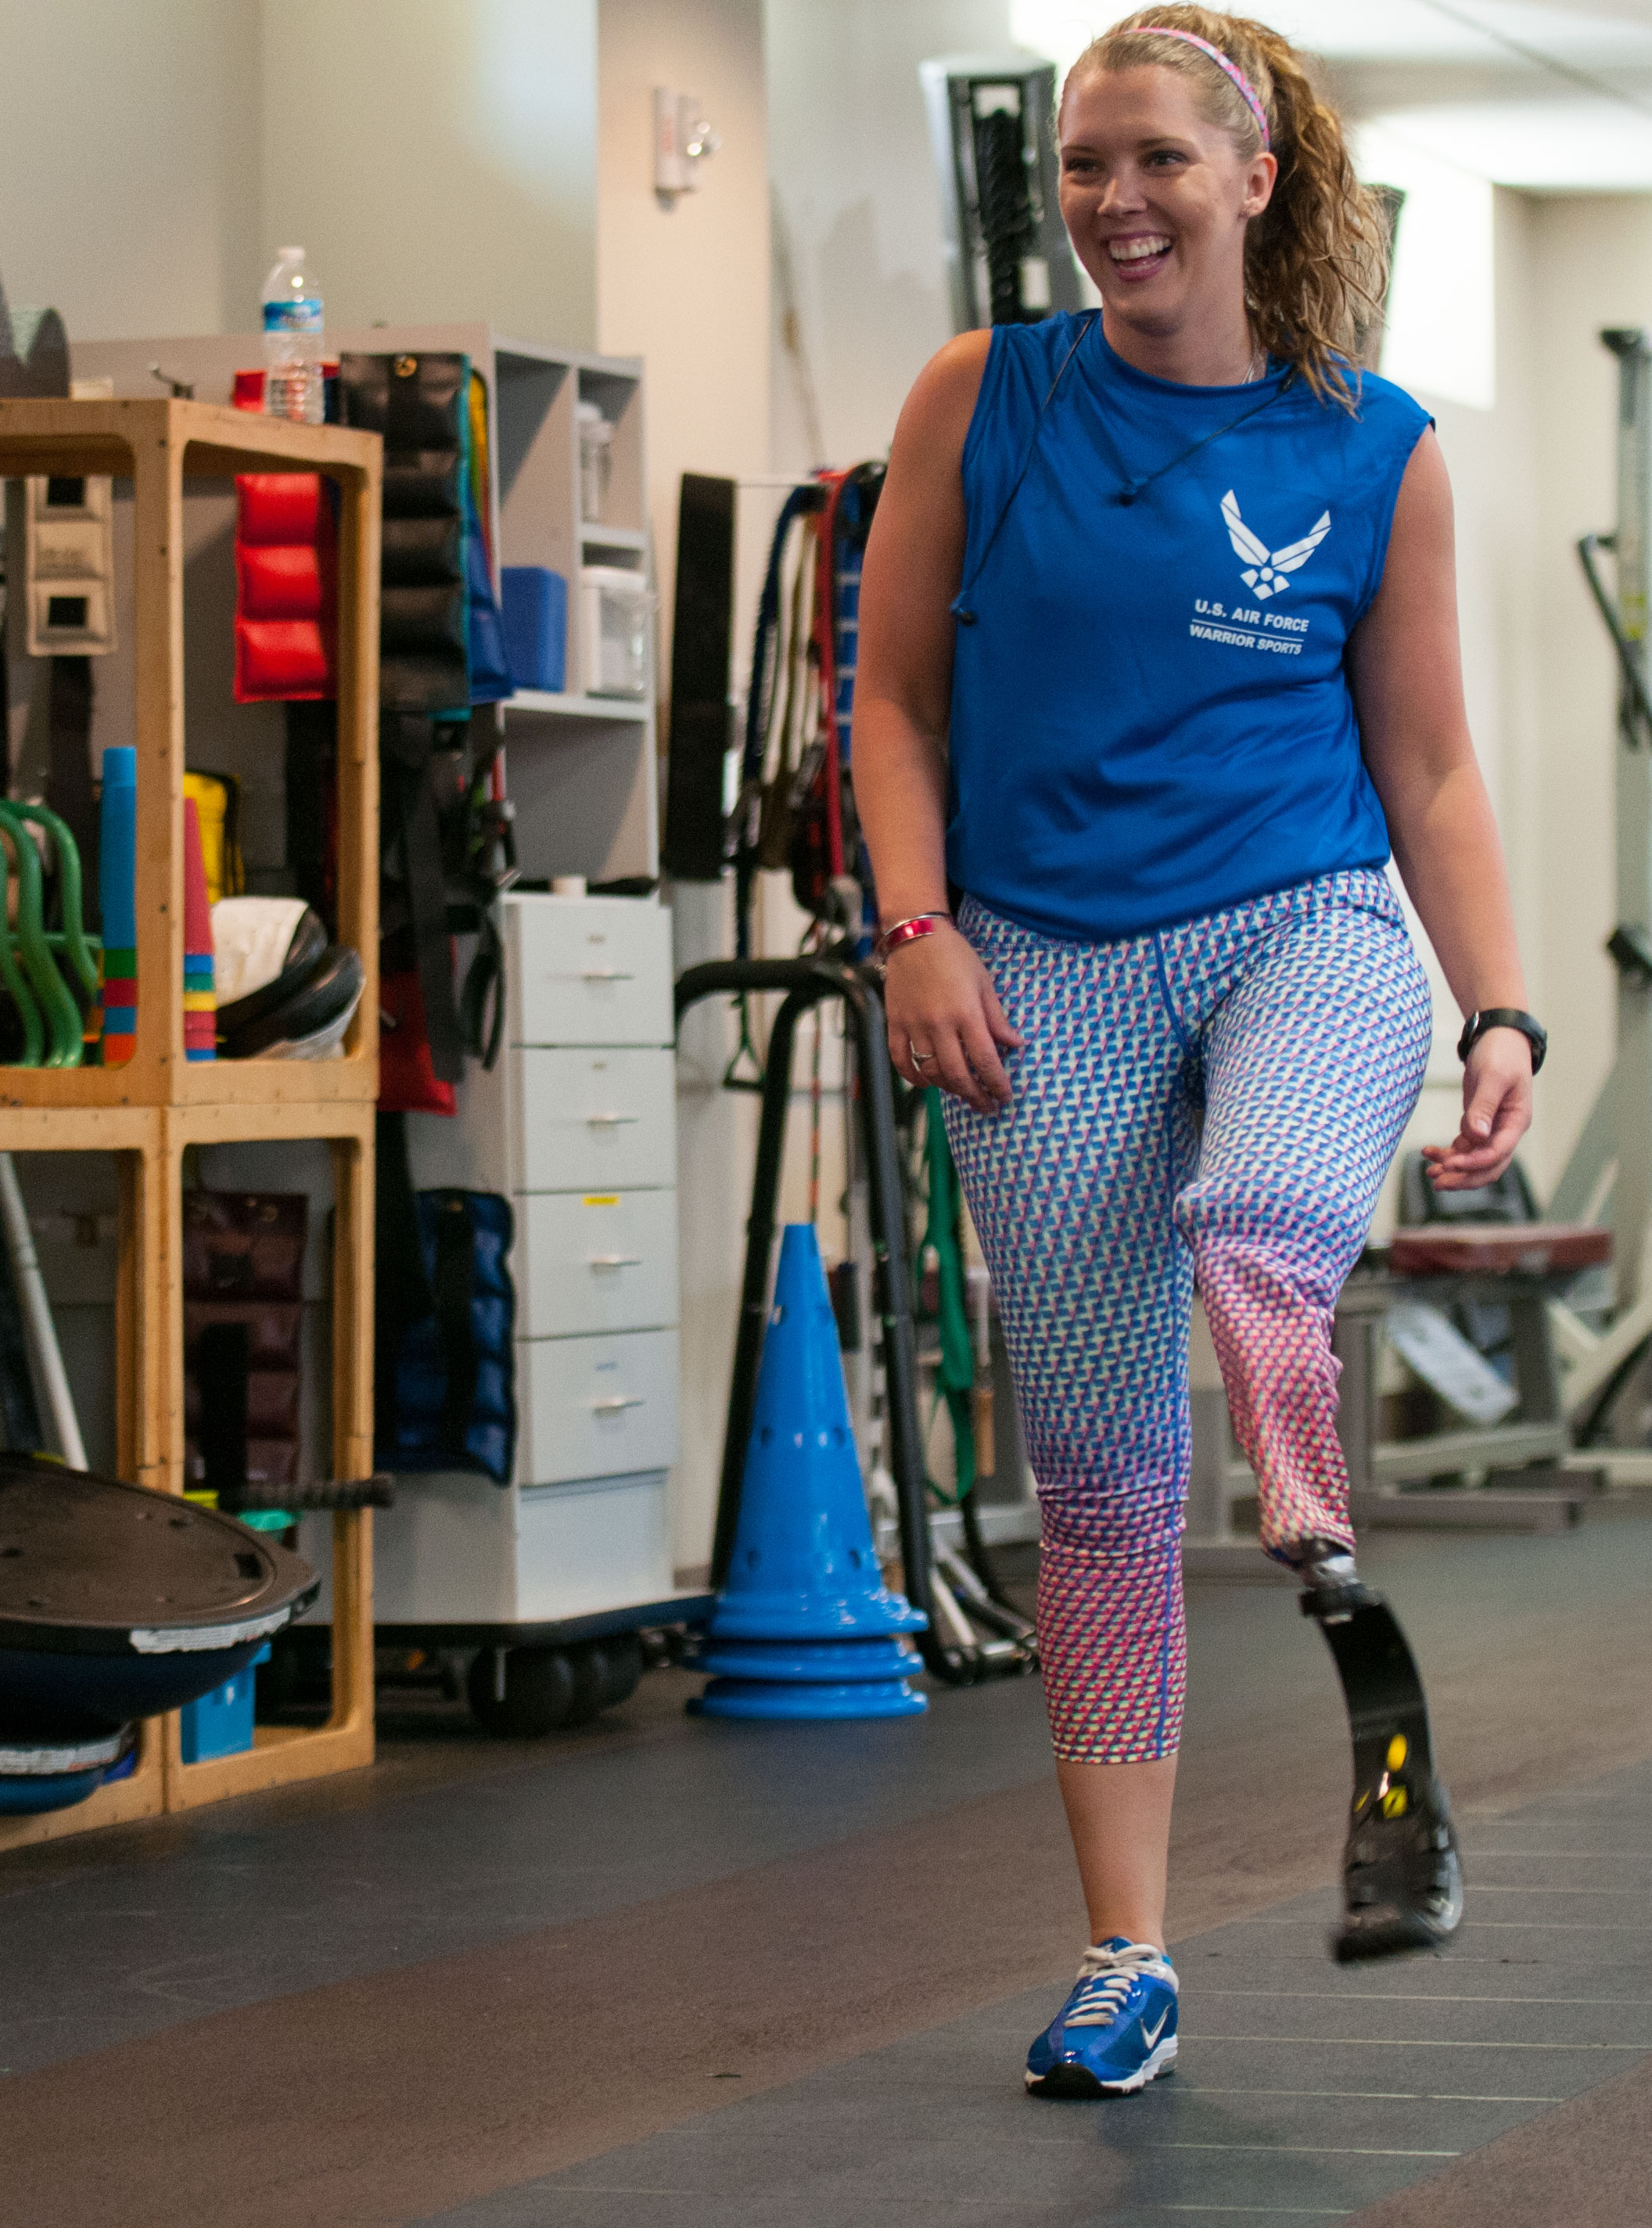 Standing tall: Amputee Airmen seek to defy odds in therapy sessions > Air  Force > Article Display